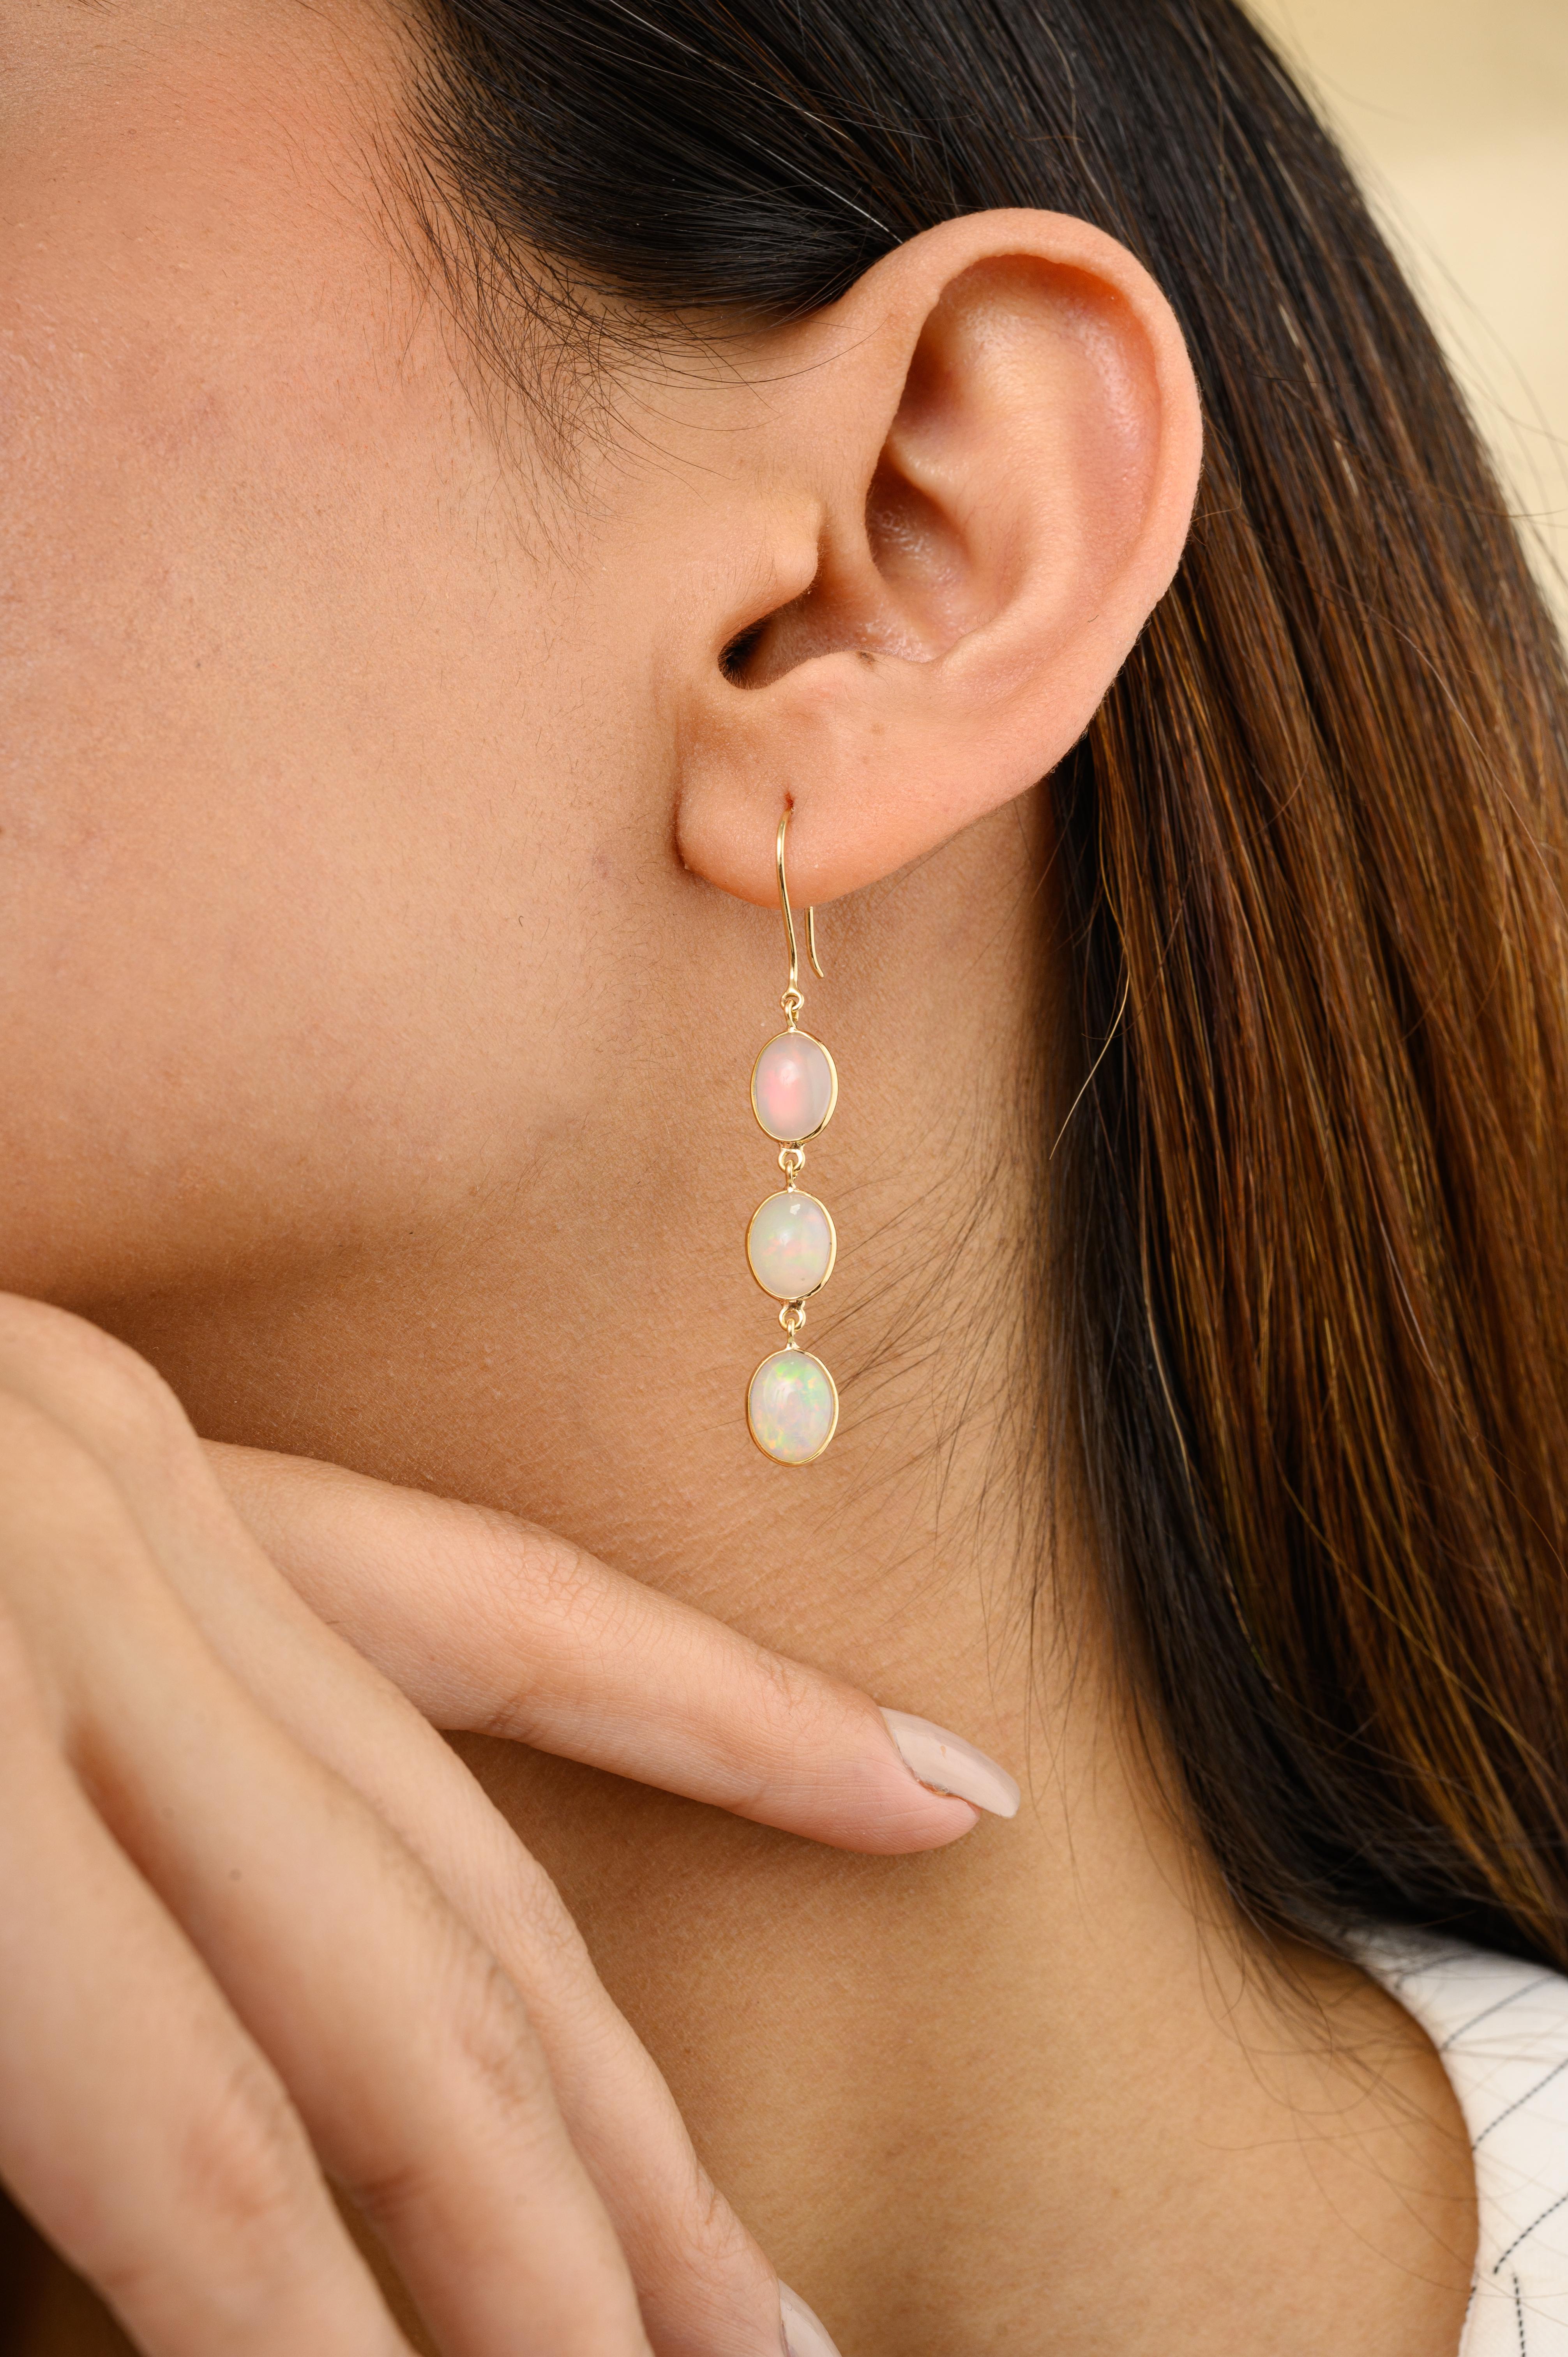 Natural Opal Gemstone Drop Earrings for Her in 18K Gold to make a statement with your look. You shall need dangle earrings to make a statement with your look. These earrings create a sparkling, luxurious look featuring oval cut opal.
Opal helps to